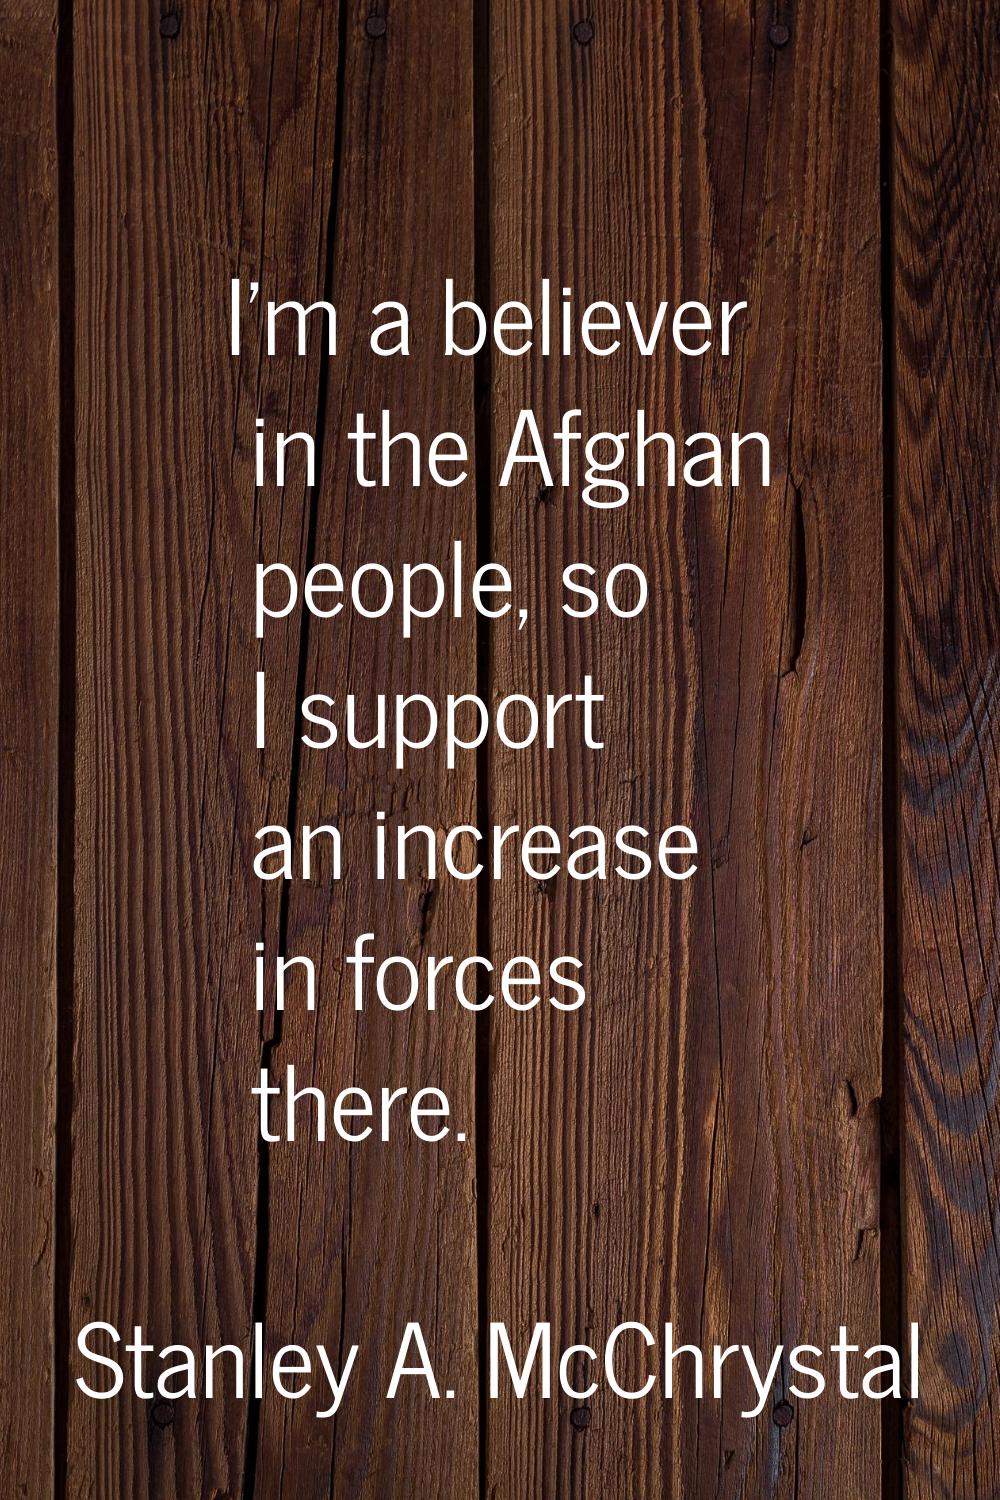 I'm a believer in the Afghan people, so I support an increase in forces there.